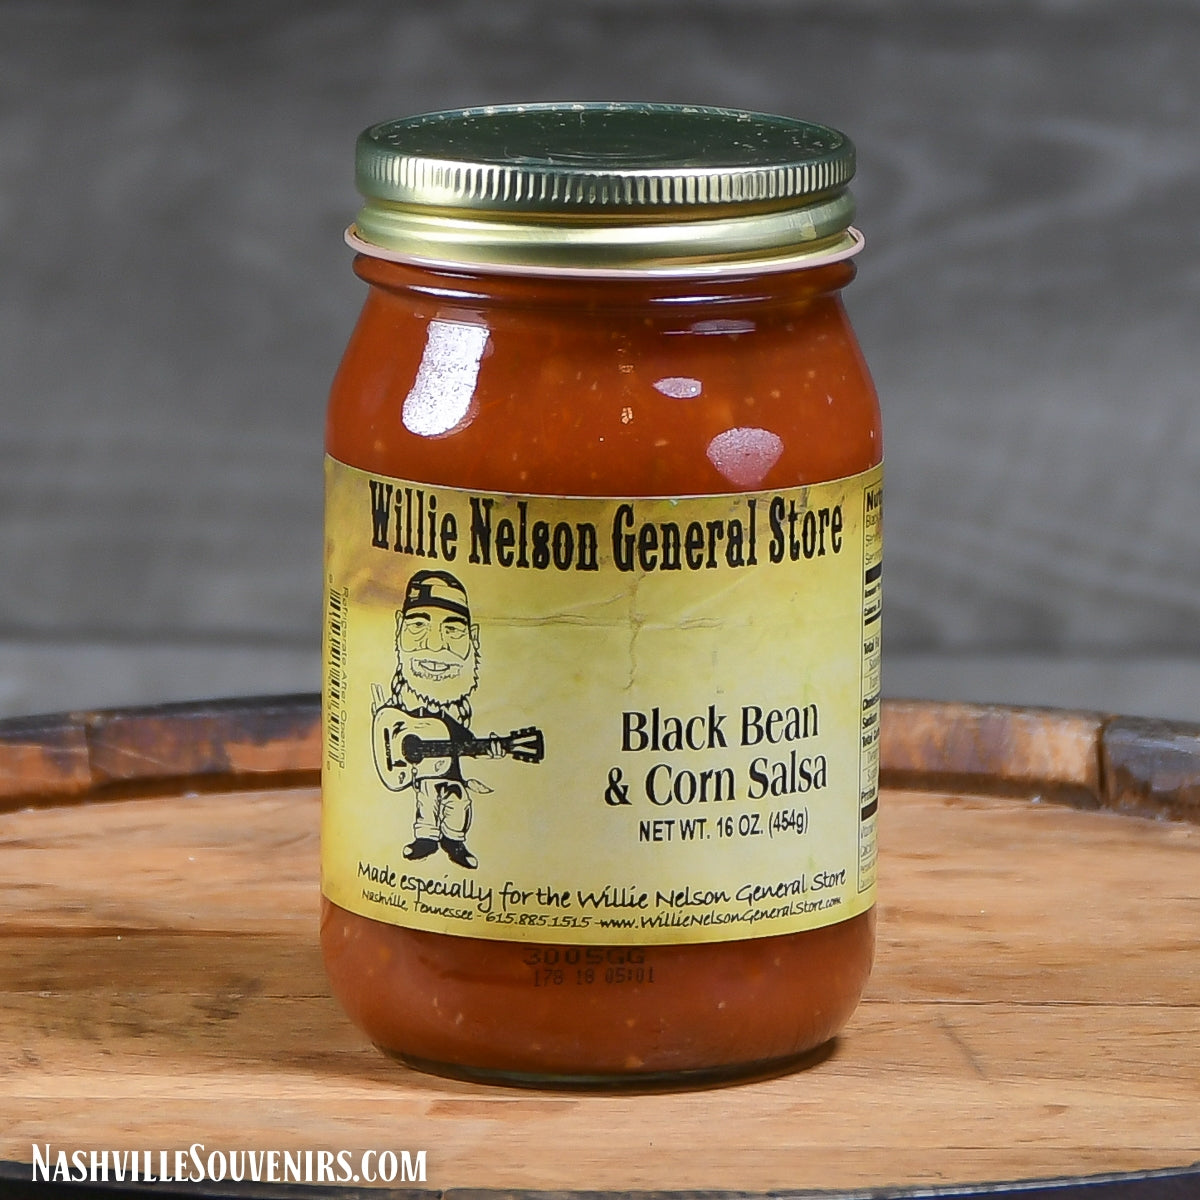 Willie Nelson General Store Black Bean and Corn Salsa